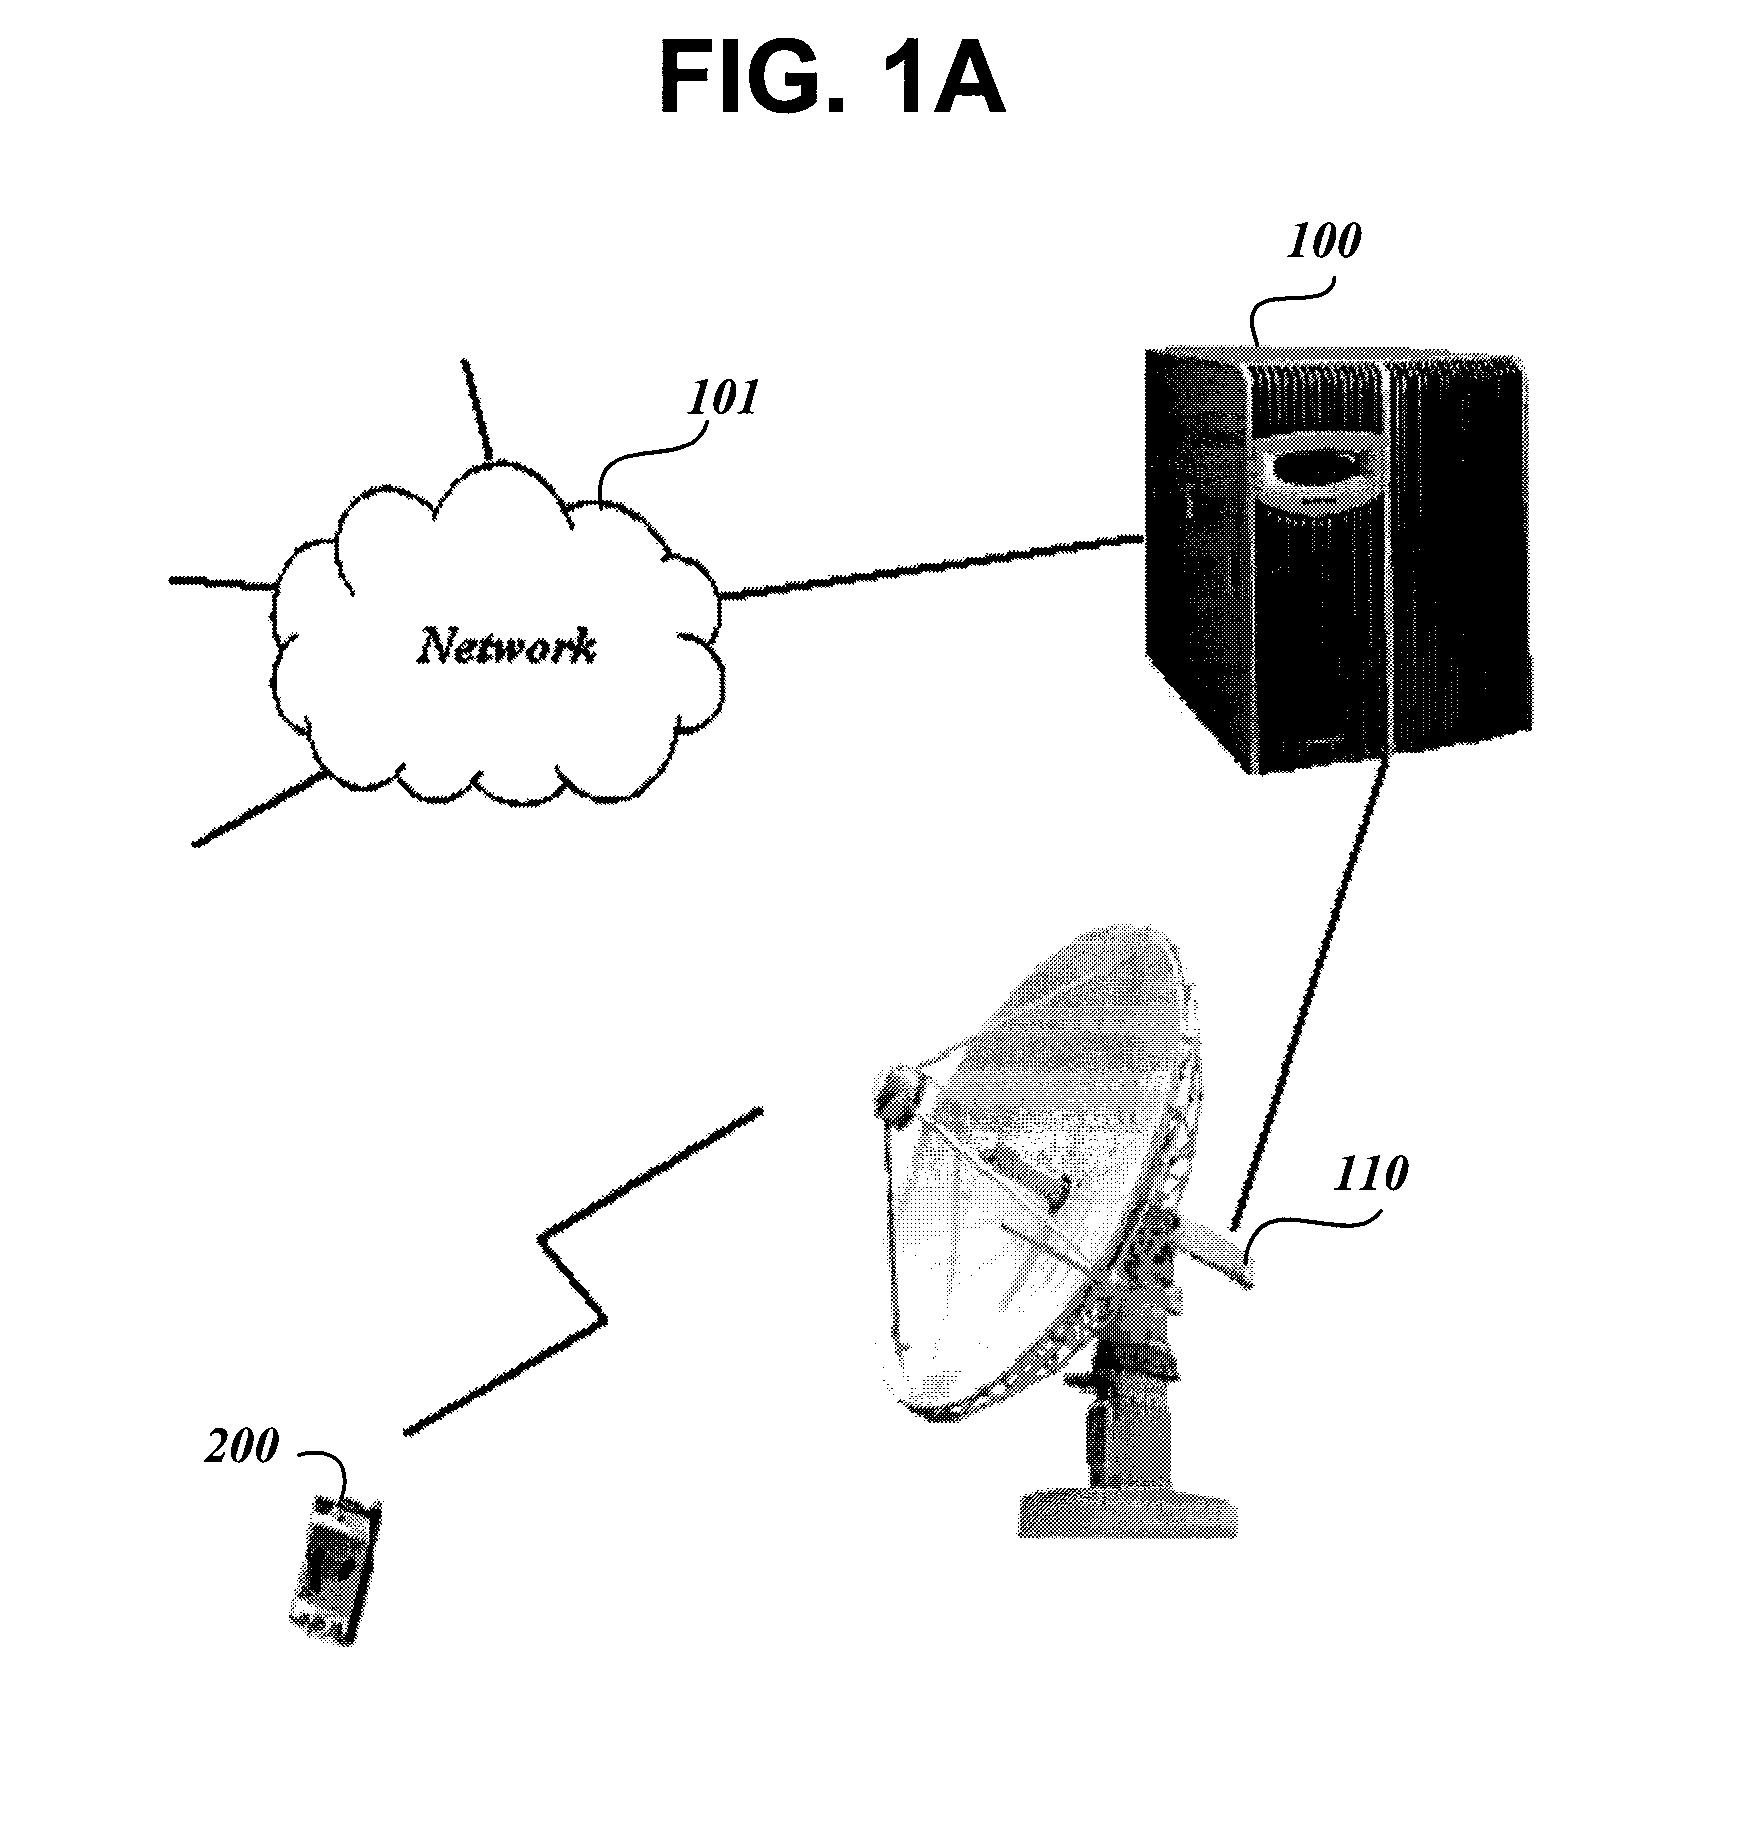 Method and apparatus for providing and using public transportation information